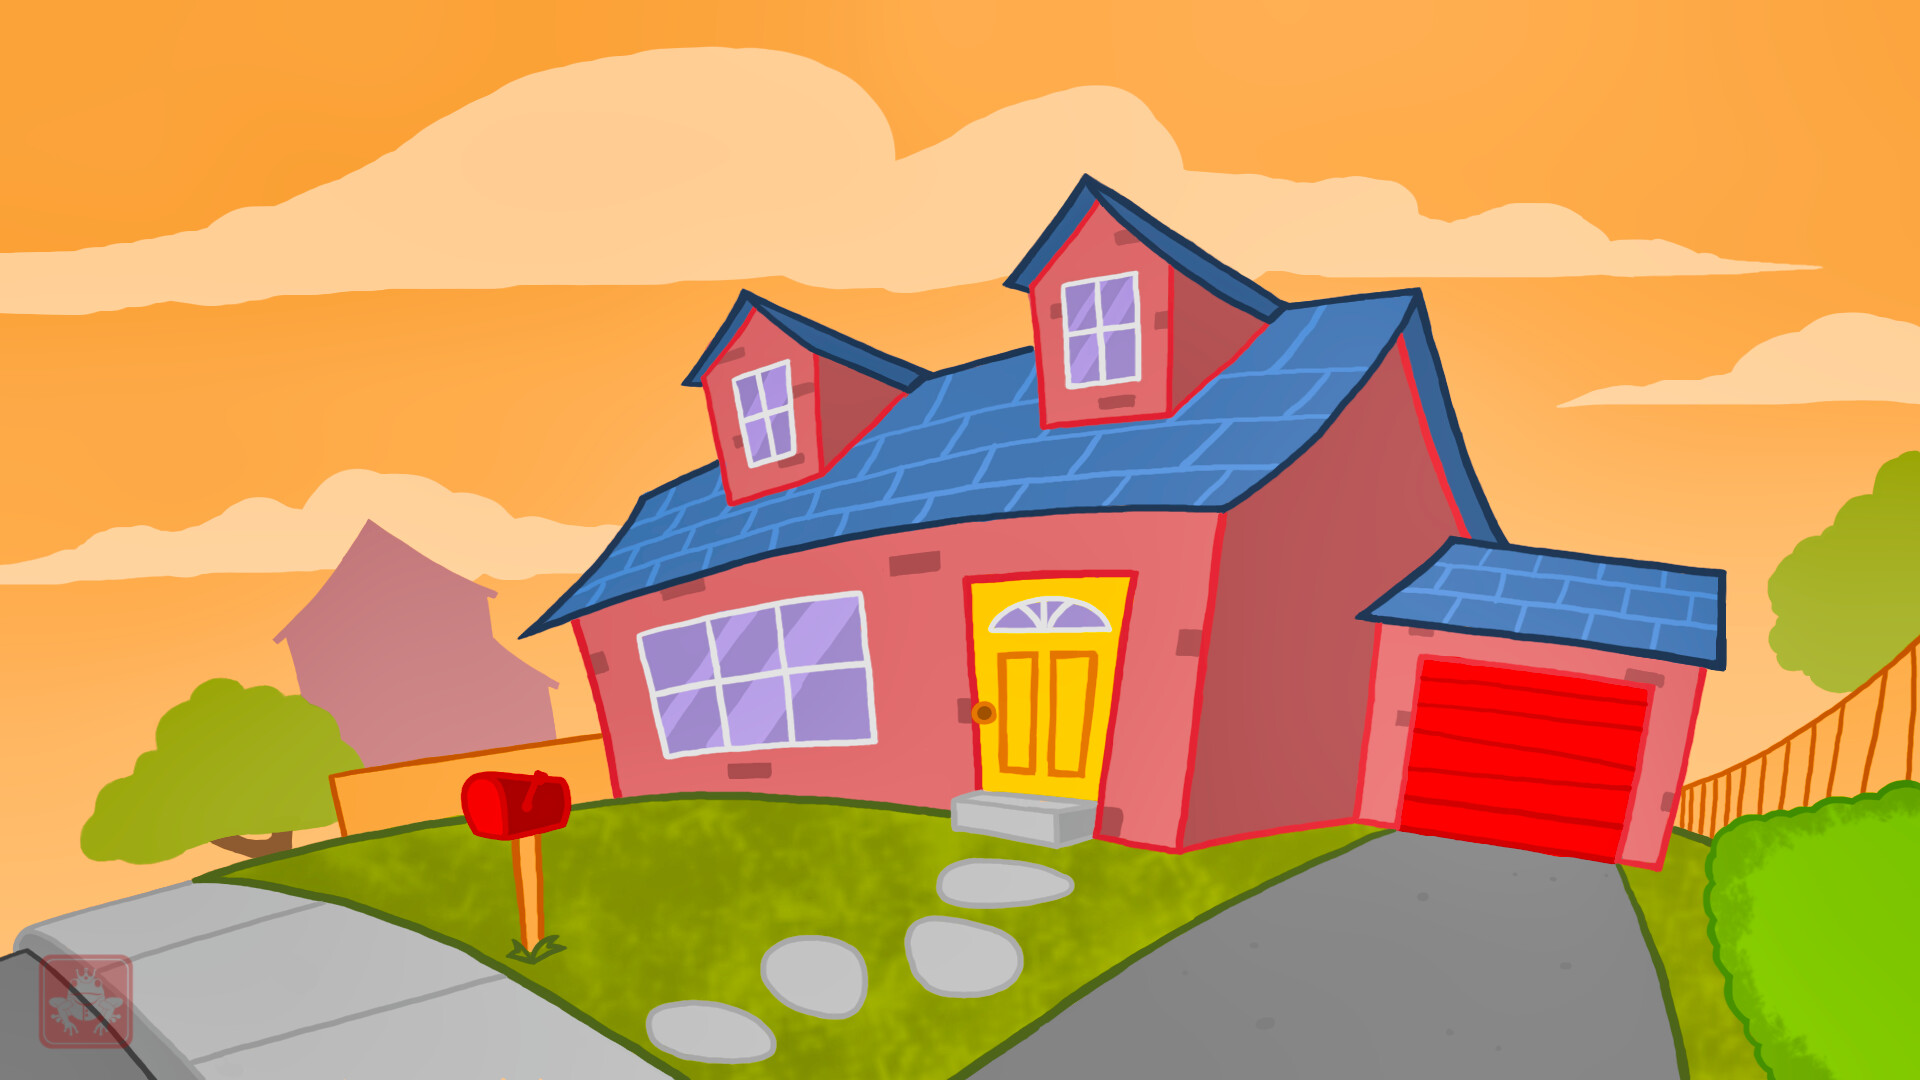 Fabled Frame - House Animation Background.